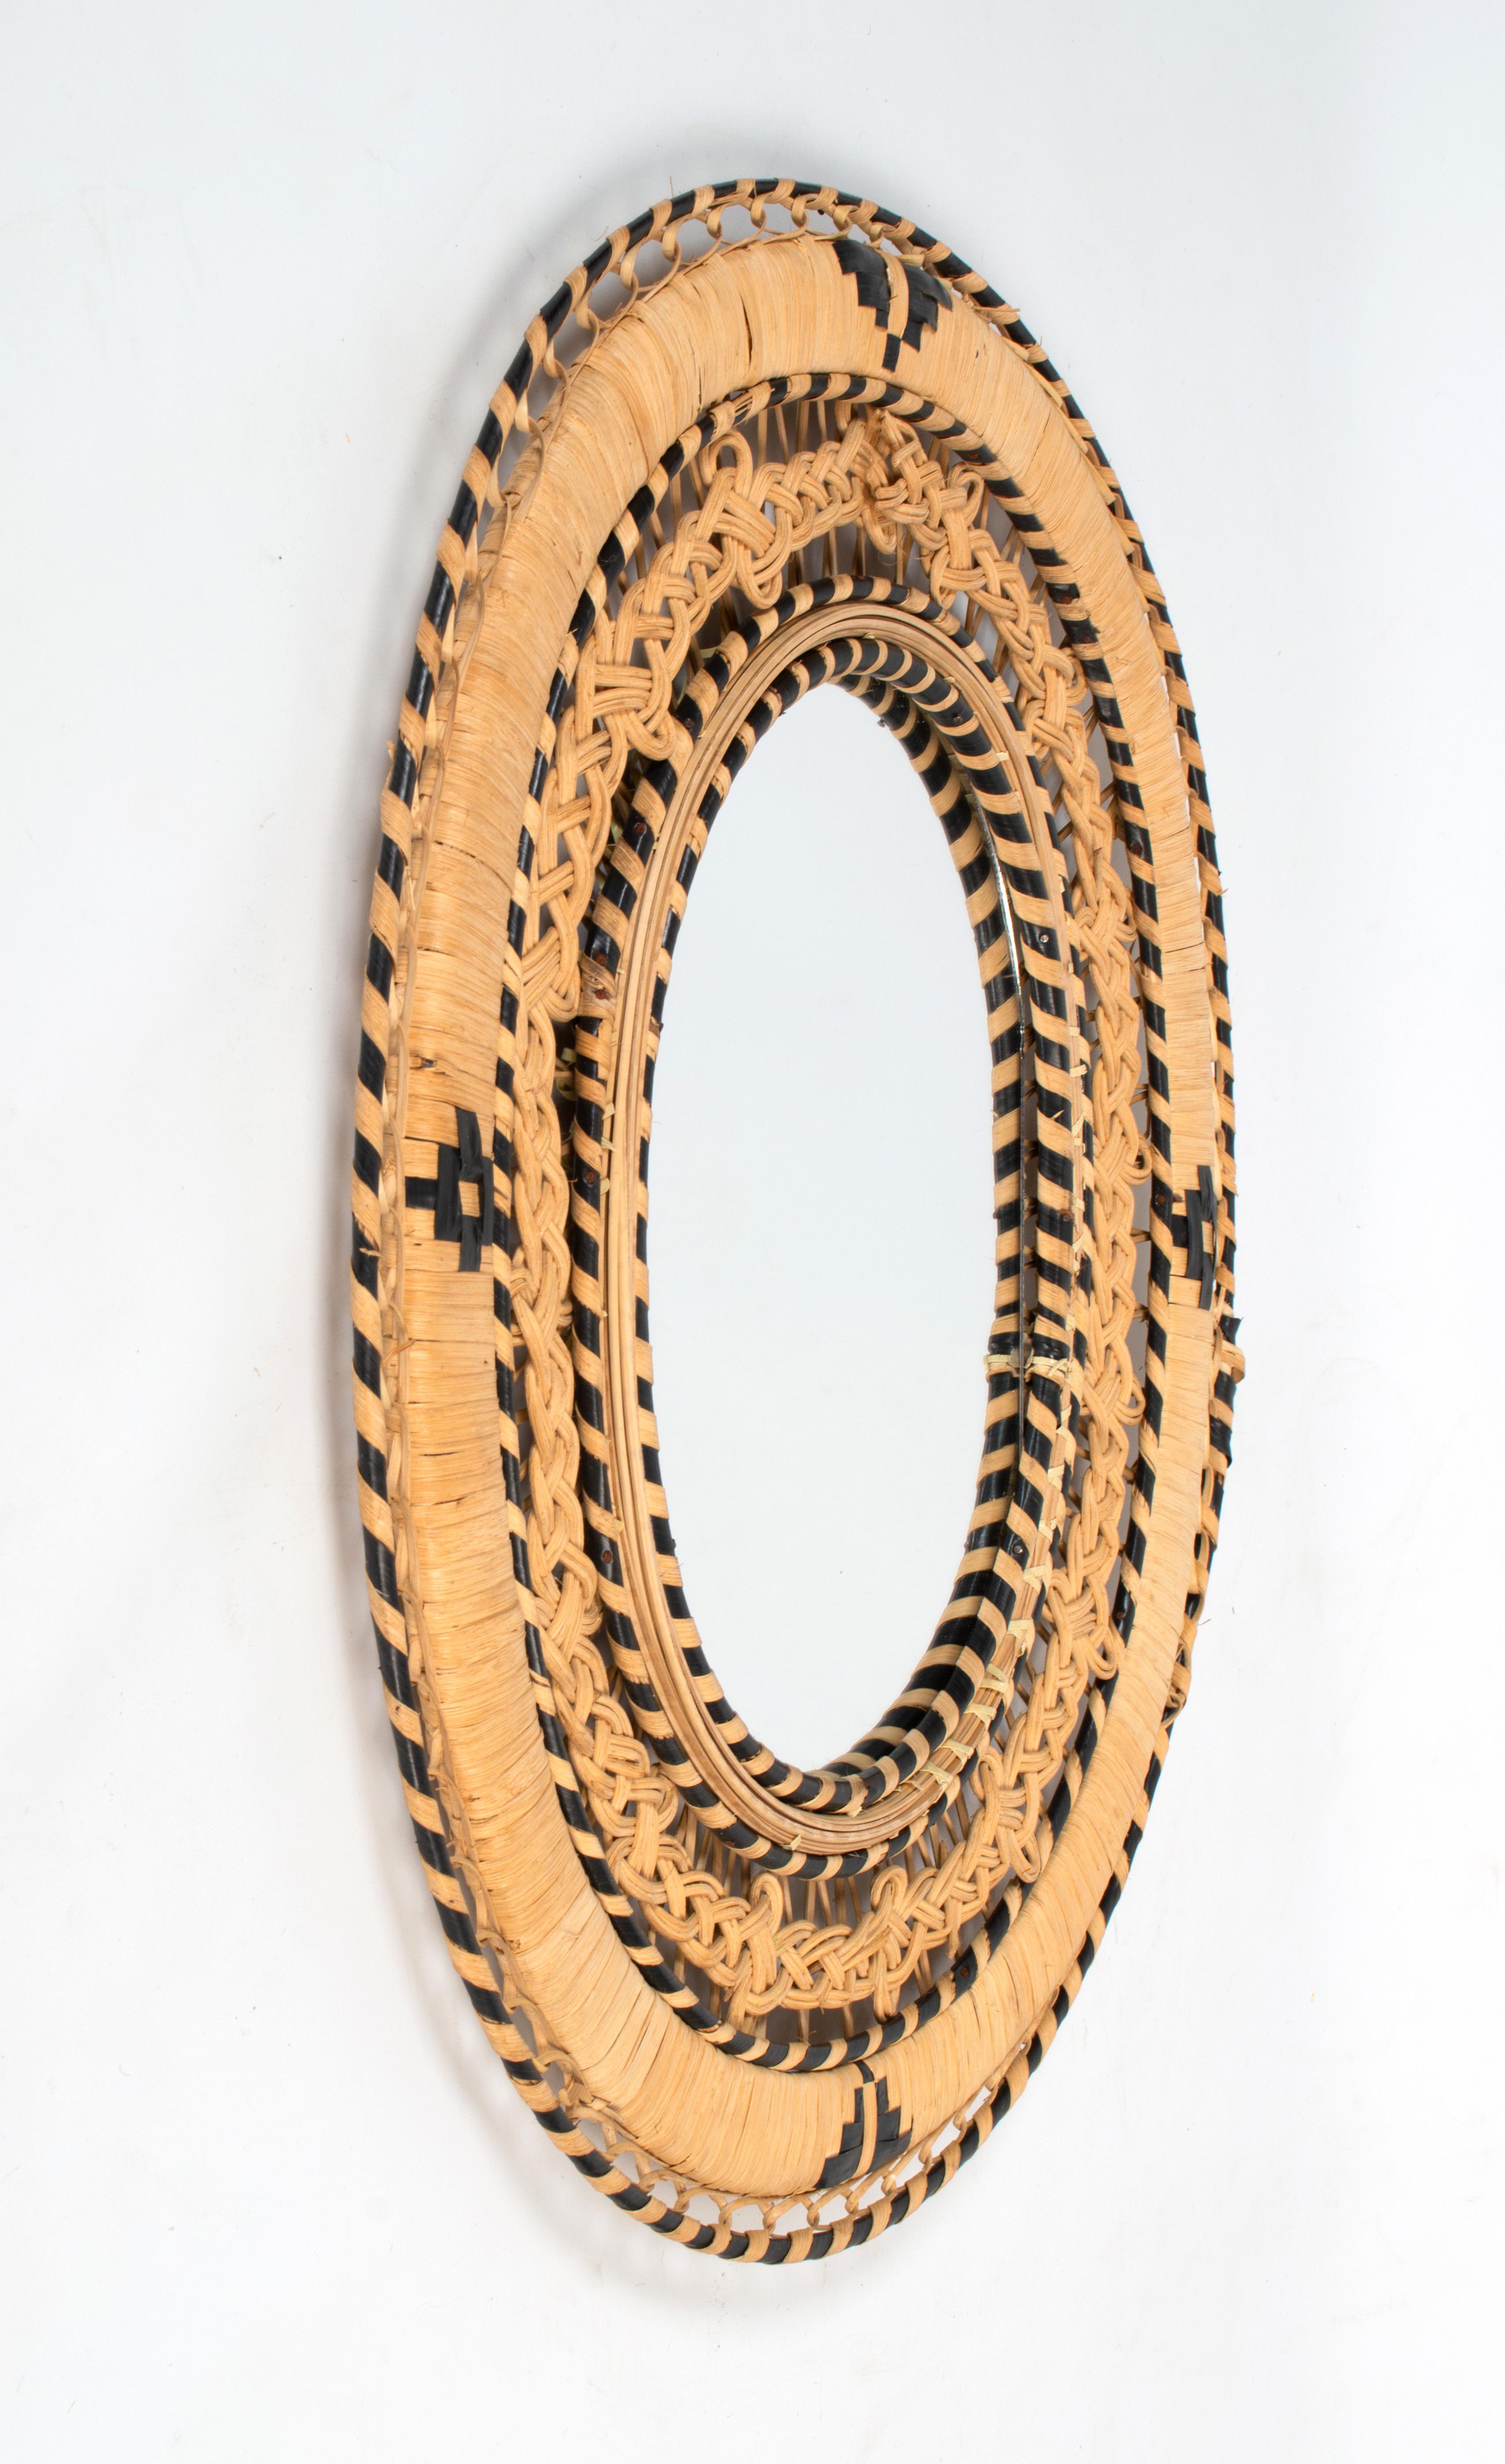 Mid Century Rattan Wicker Emmanuelle Peacock Oval Wall Mirror Spain, C.1970

Excellent condition commensurate of age.

